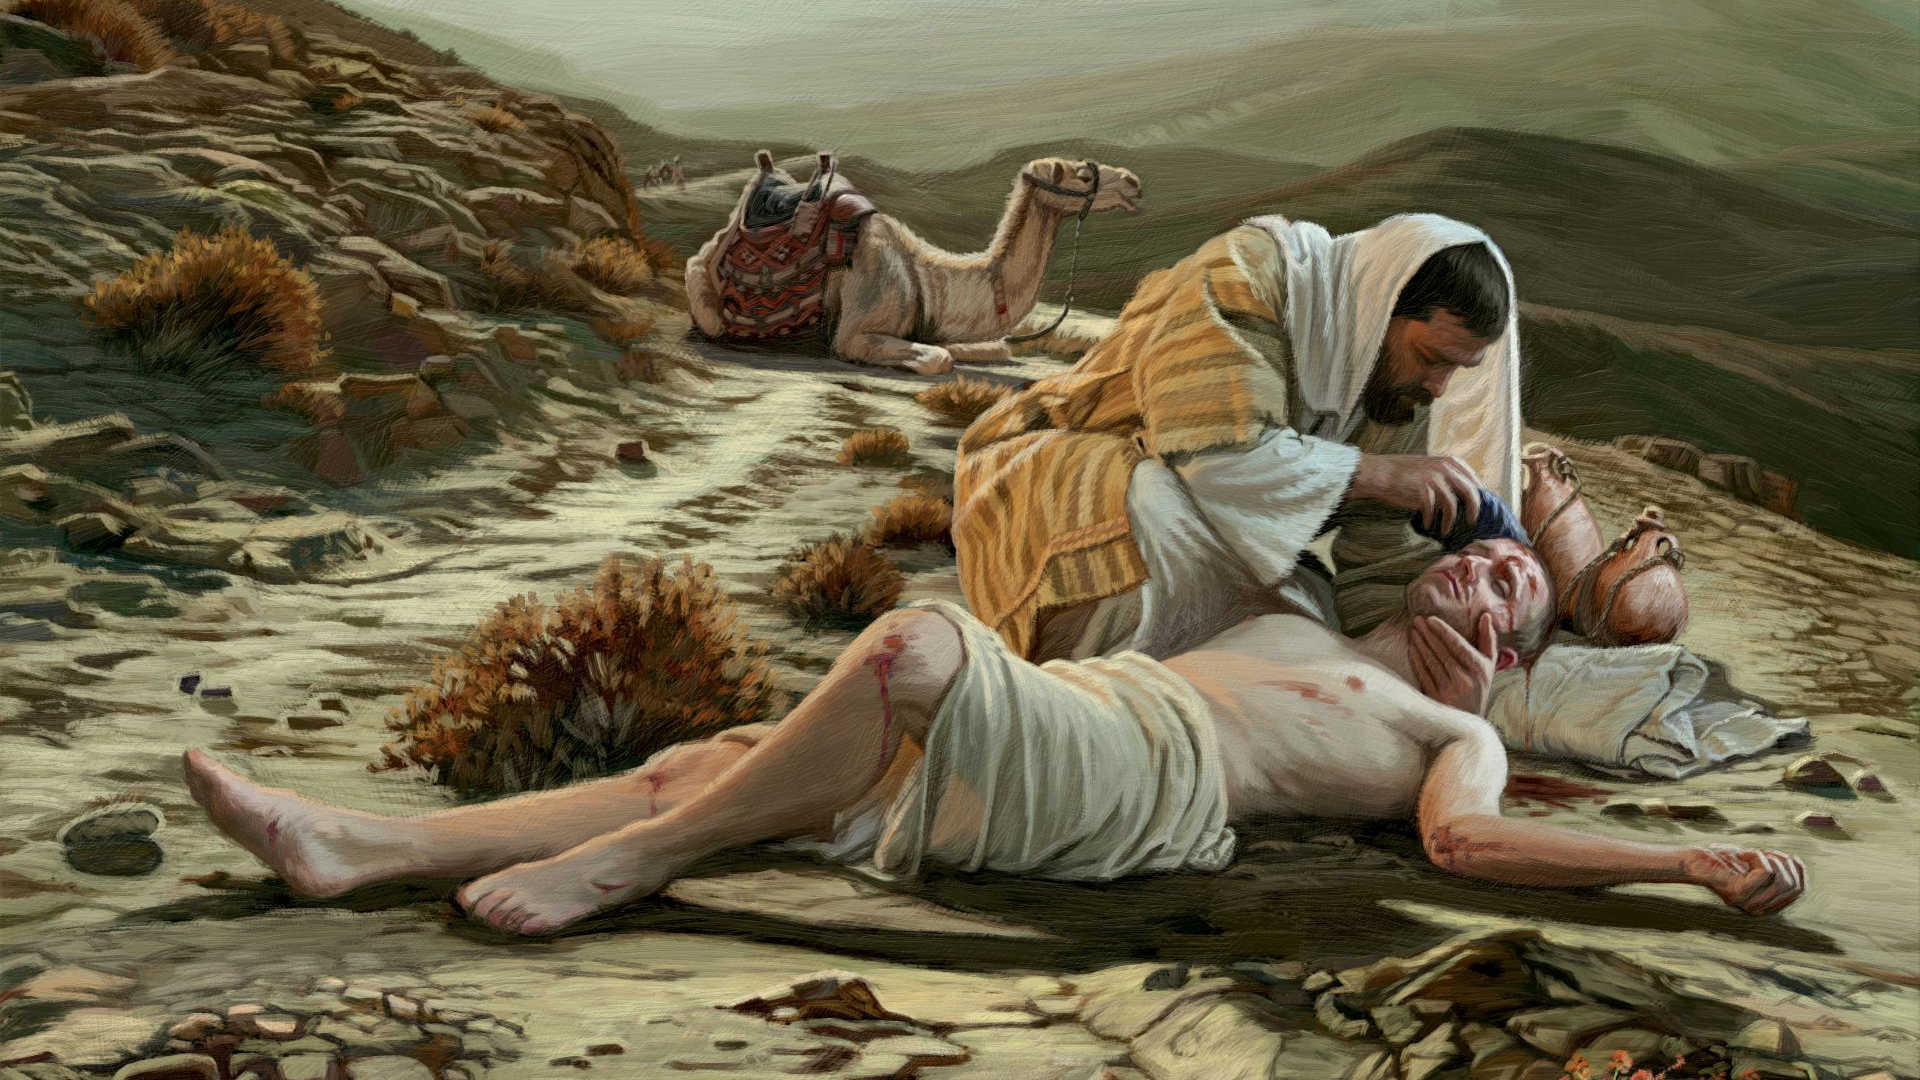 Dan Burr's painting, "The Good Samaritan," depicting the Samaritan administering to the wounded man on the road.